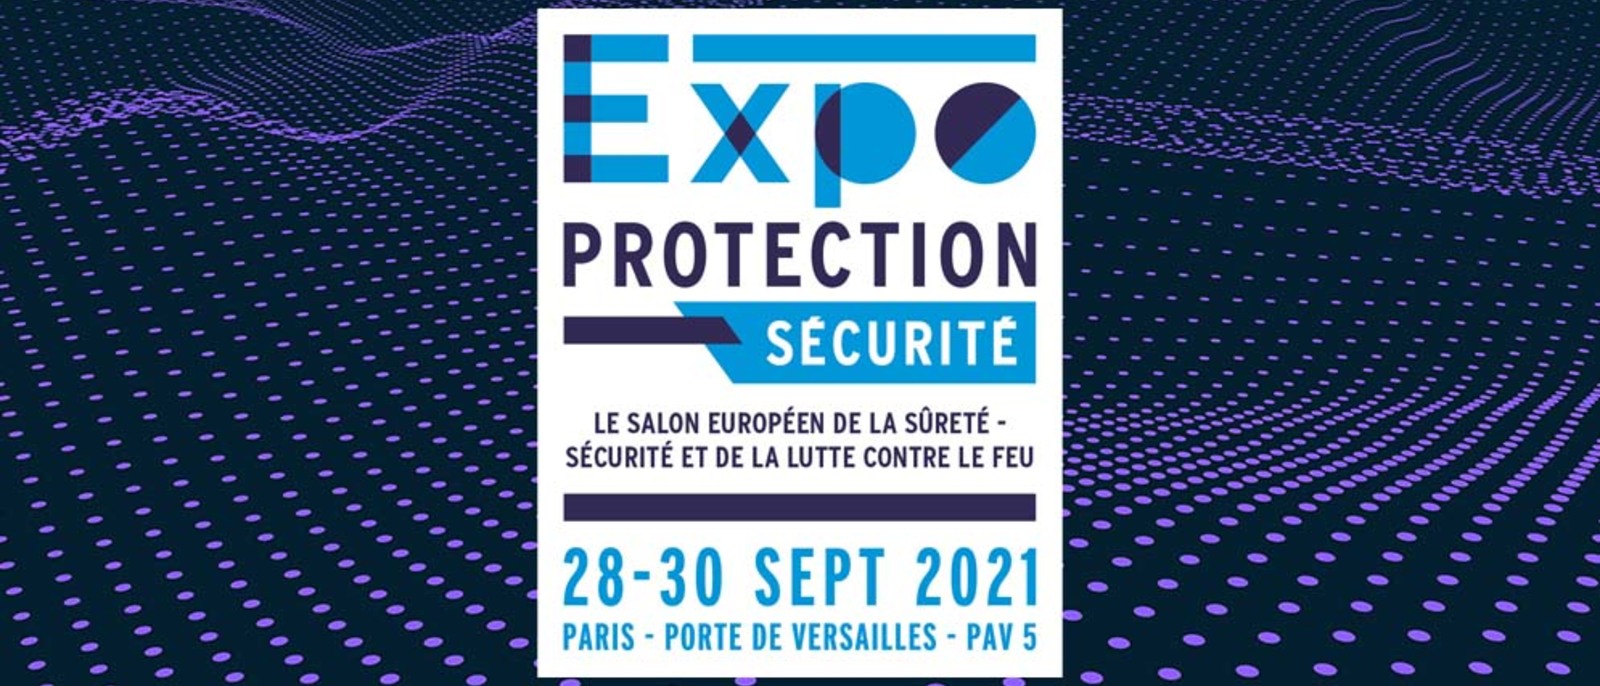 ExpoProtection